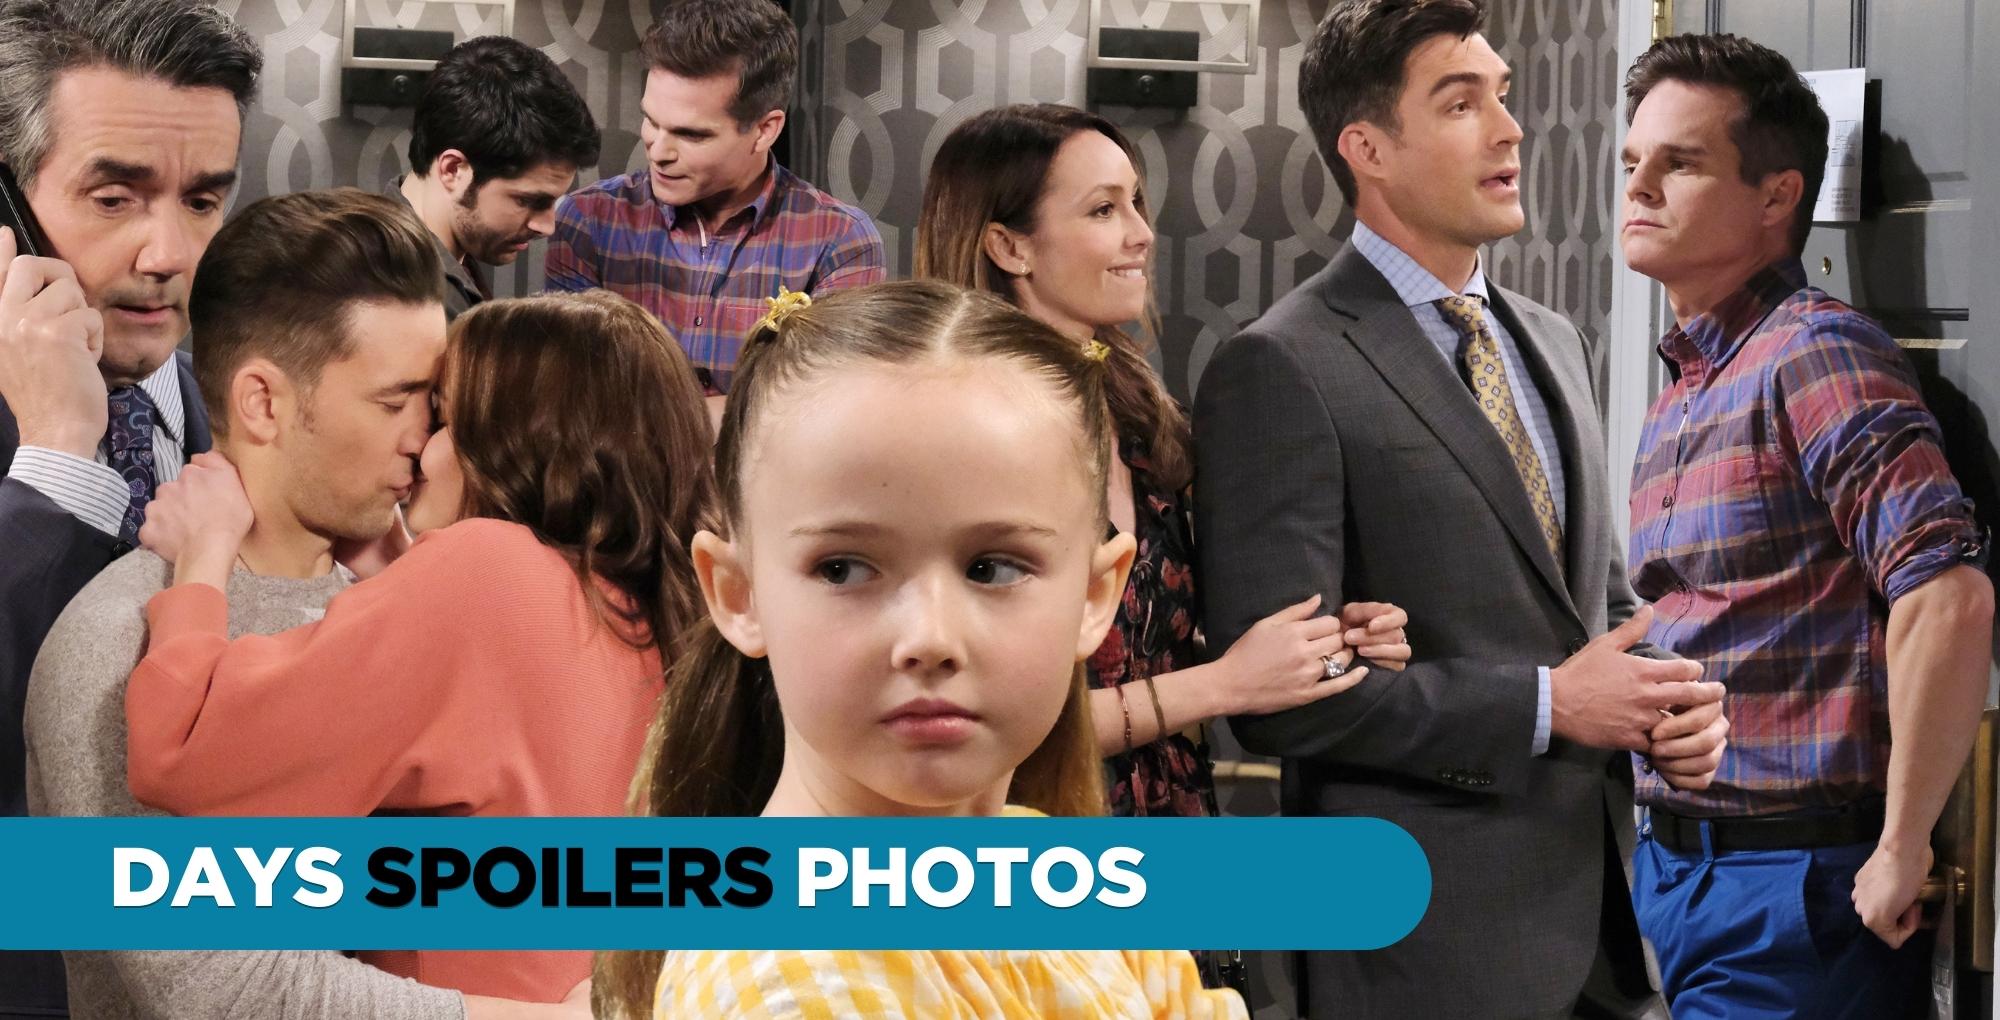 days spoilers for wednesday, august 30, 2023, collage of photos.